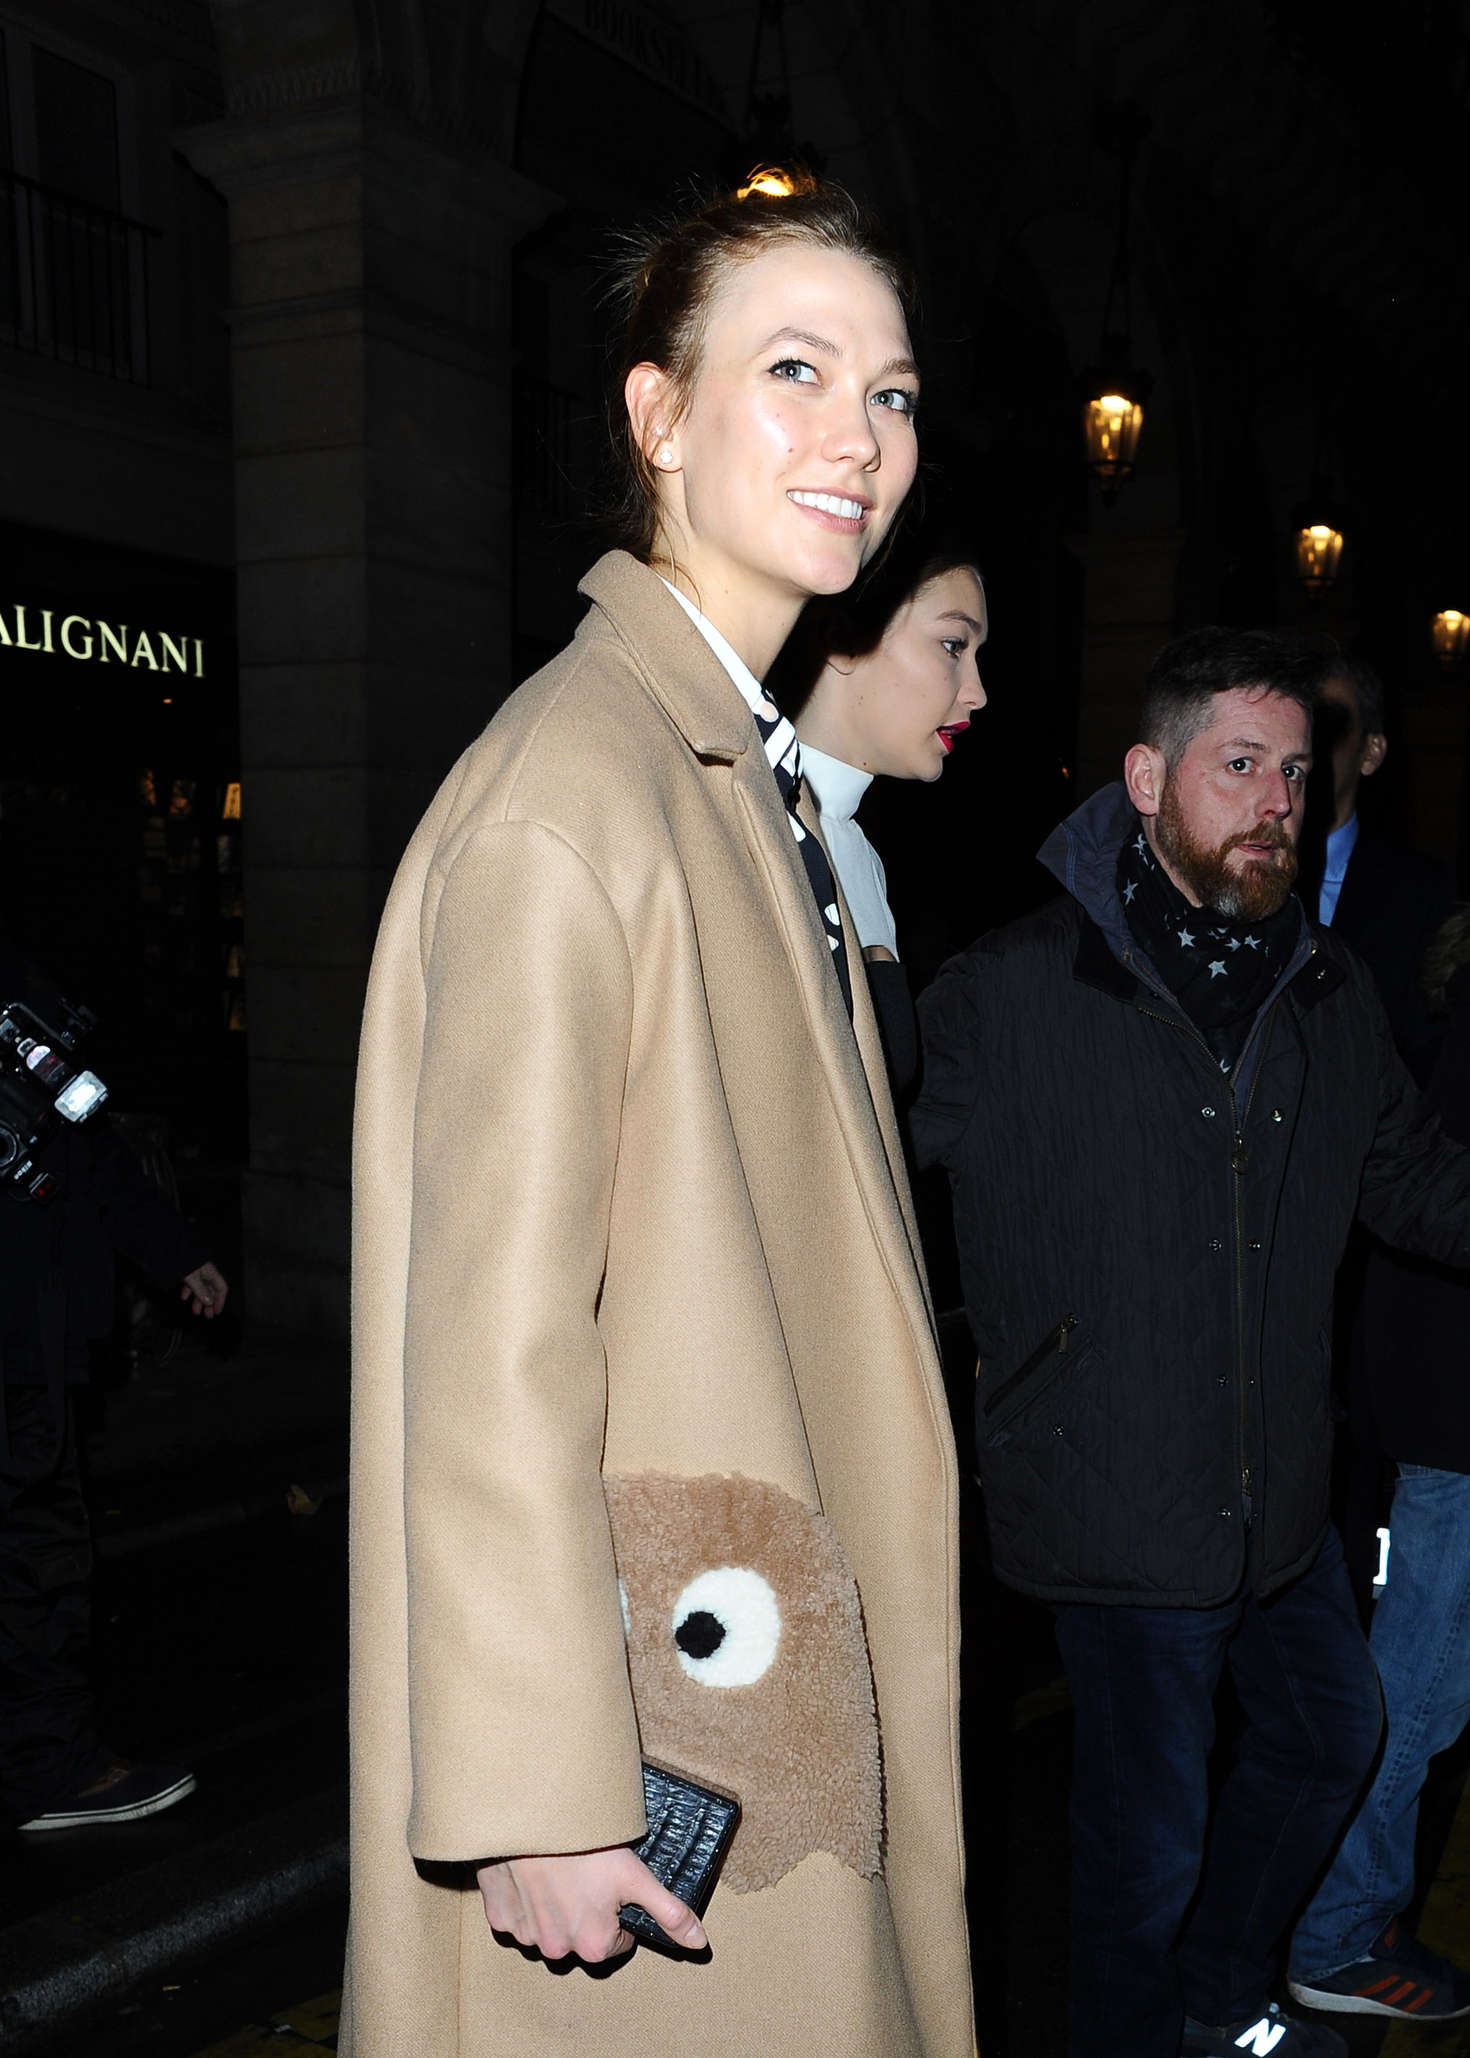 Karlie Kloss 2016 : Karlie Kloss: Leaving the Dior Afterparty -06